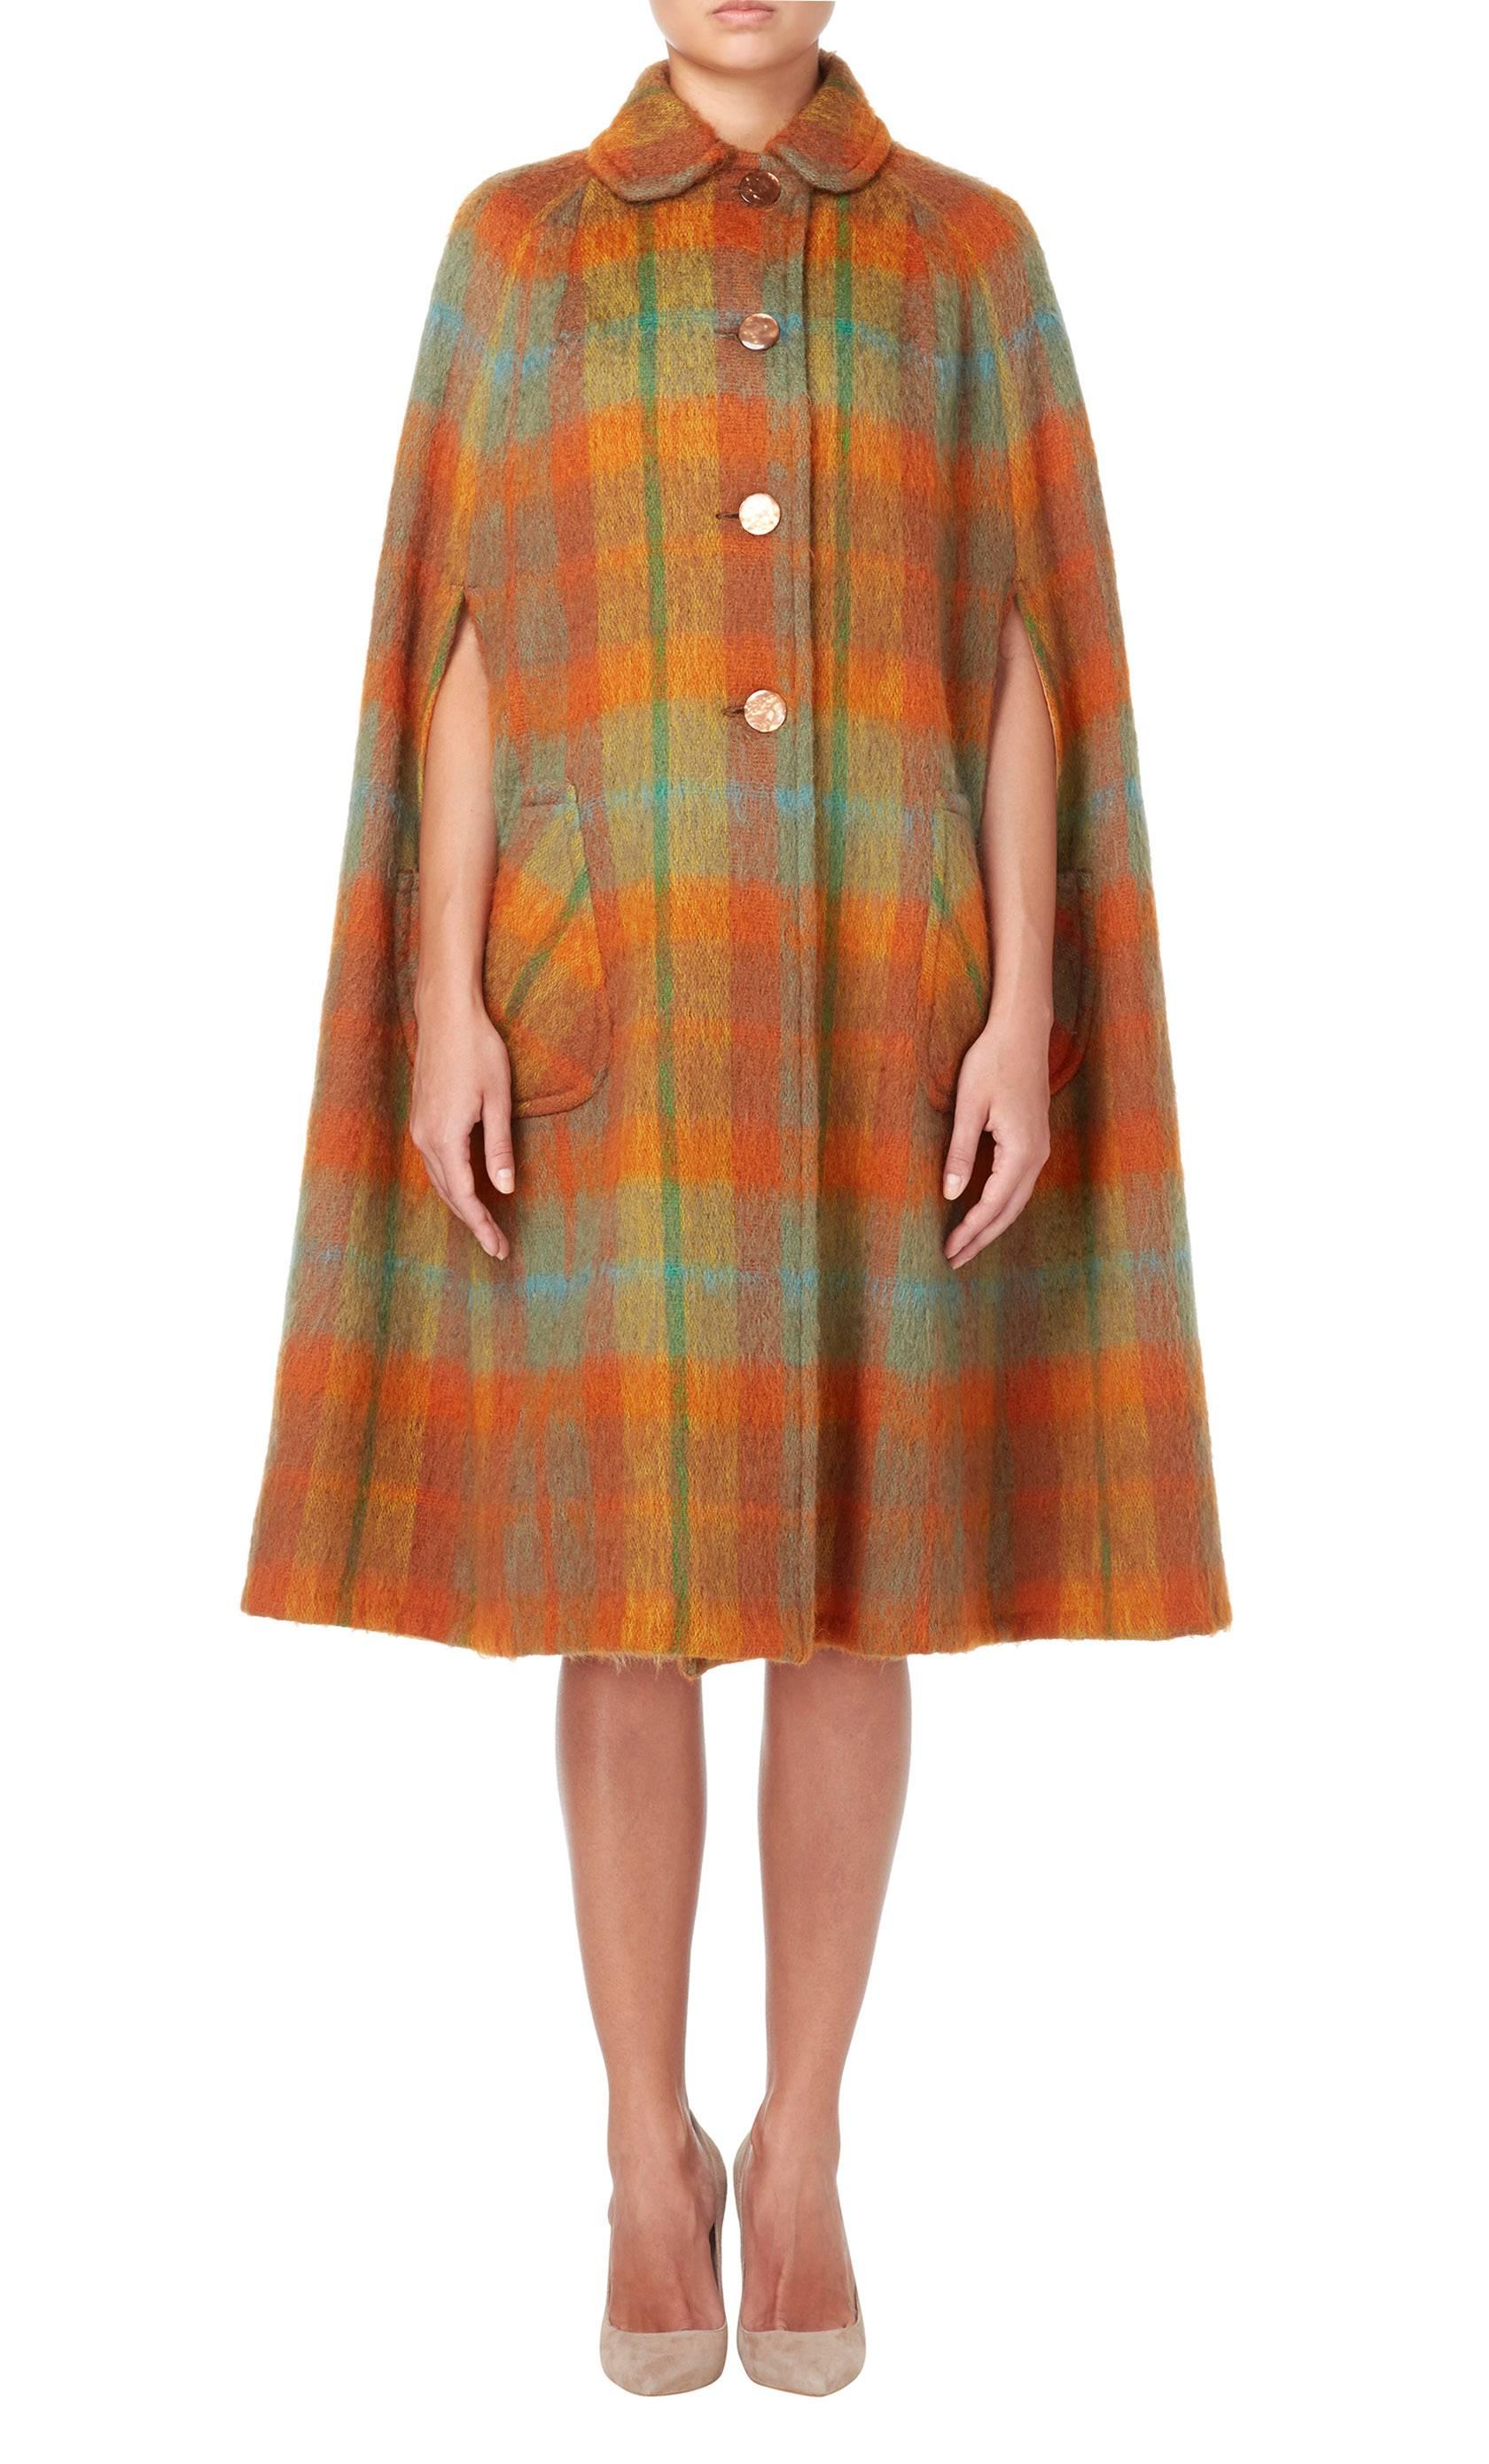 The autumnal hues of this 1970s Strathtay cape make this perfect for cold days and weekends in the country. Constructed in orange, brown and green checked mohair, the cape fastens with buttons to the front and features a peter pan collar and